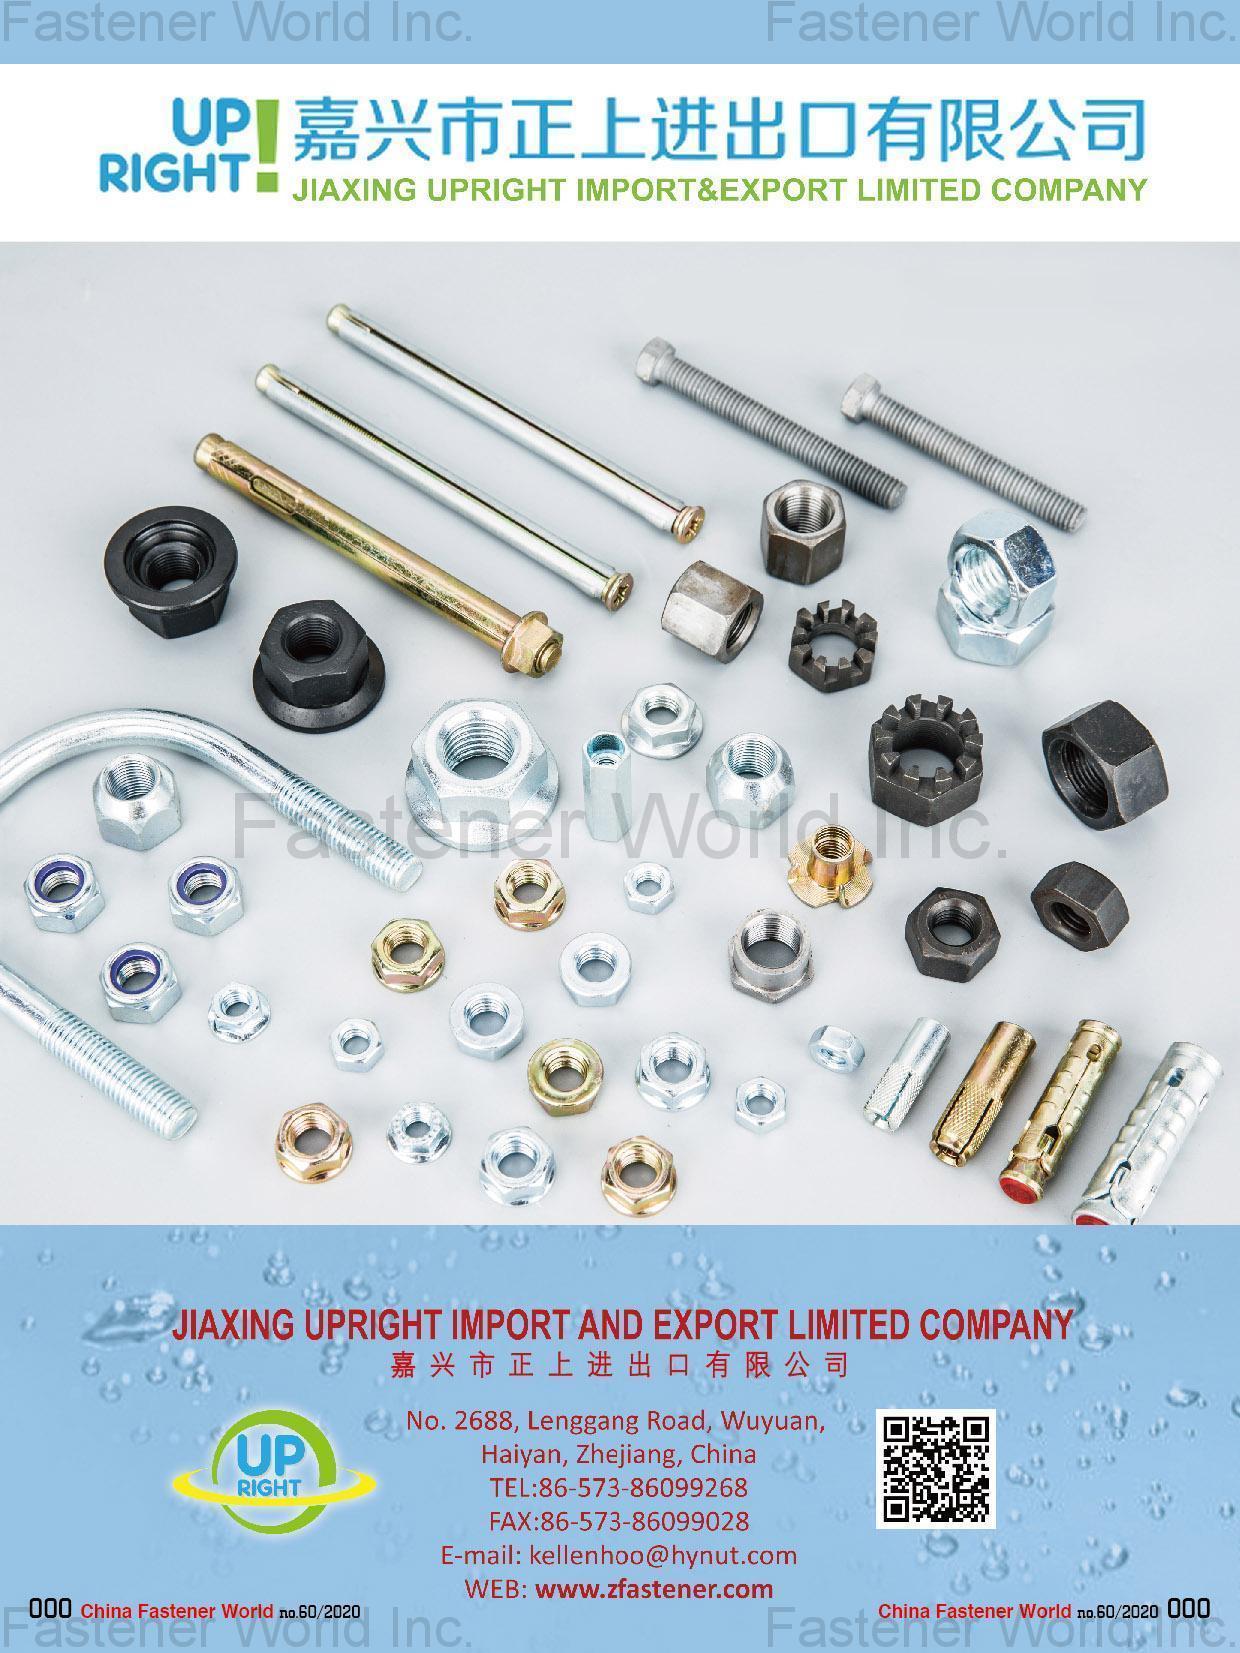 JIAXING UPRIGHT IMPORT AND EXPORT LIMITED COMPANY , Hexagon Nuts / Lug Nuts / Cap Nuts / Flange Nuts / Nylon Insert Nuts / Tee or T Nuts / Blind Nuts / Rivet Nuts